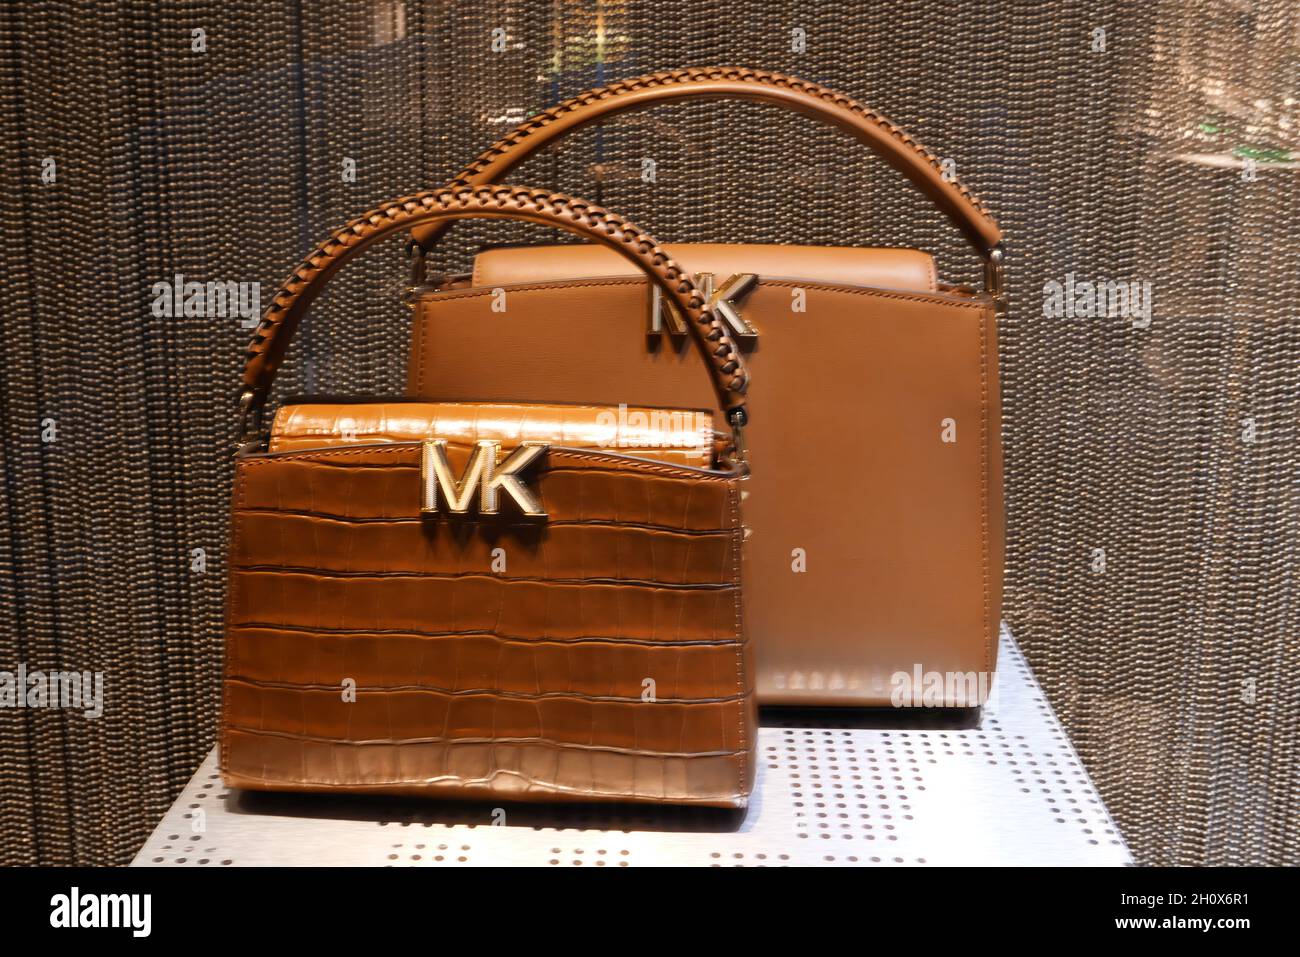 BAGS ON DISPLAY AT MICHAEL KORS FASHION BOUTIQUE Stock Photo